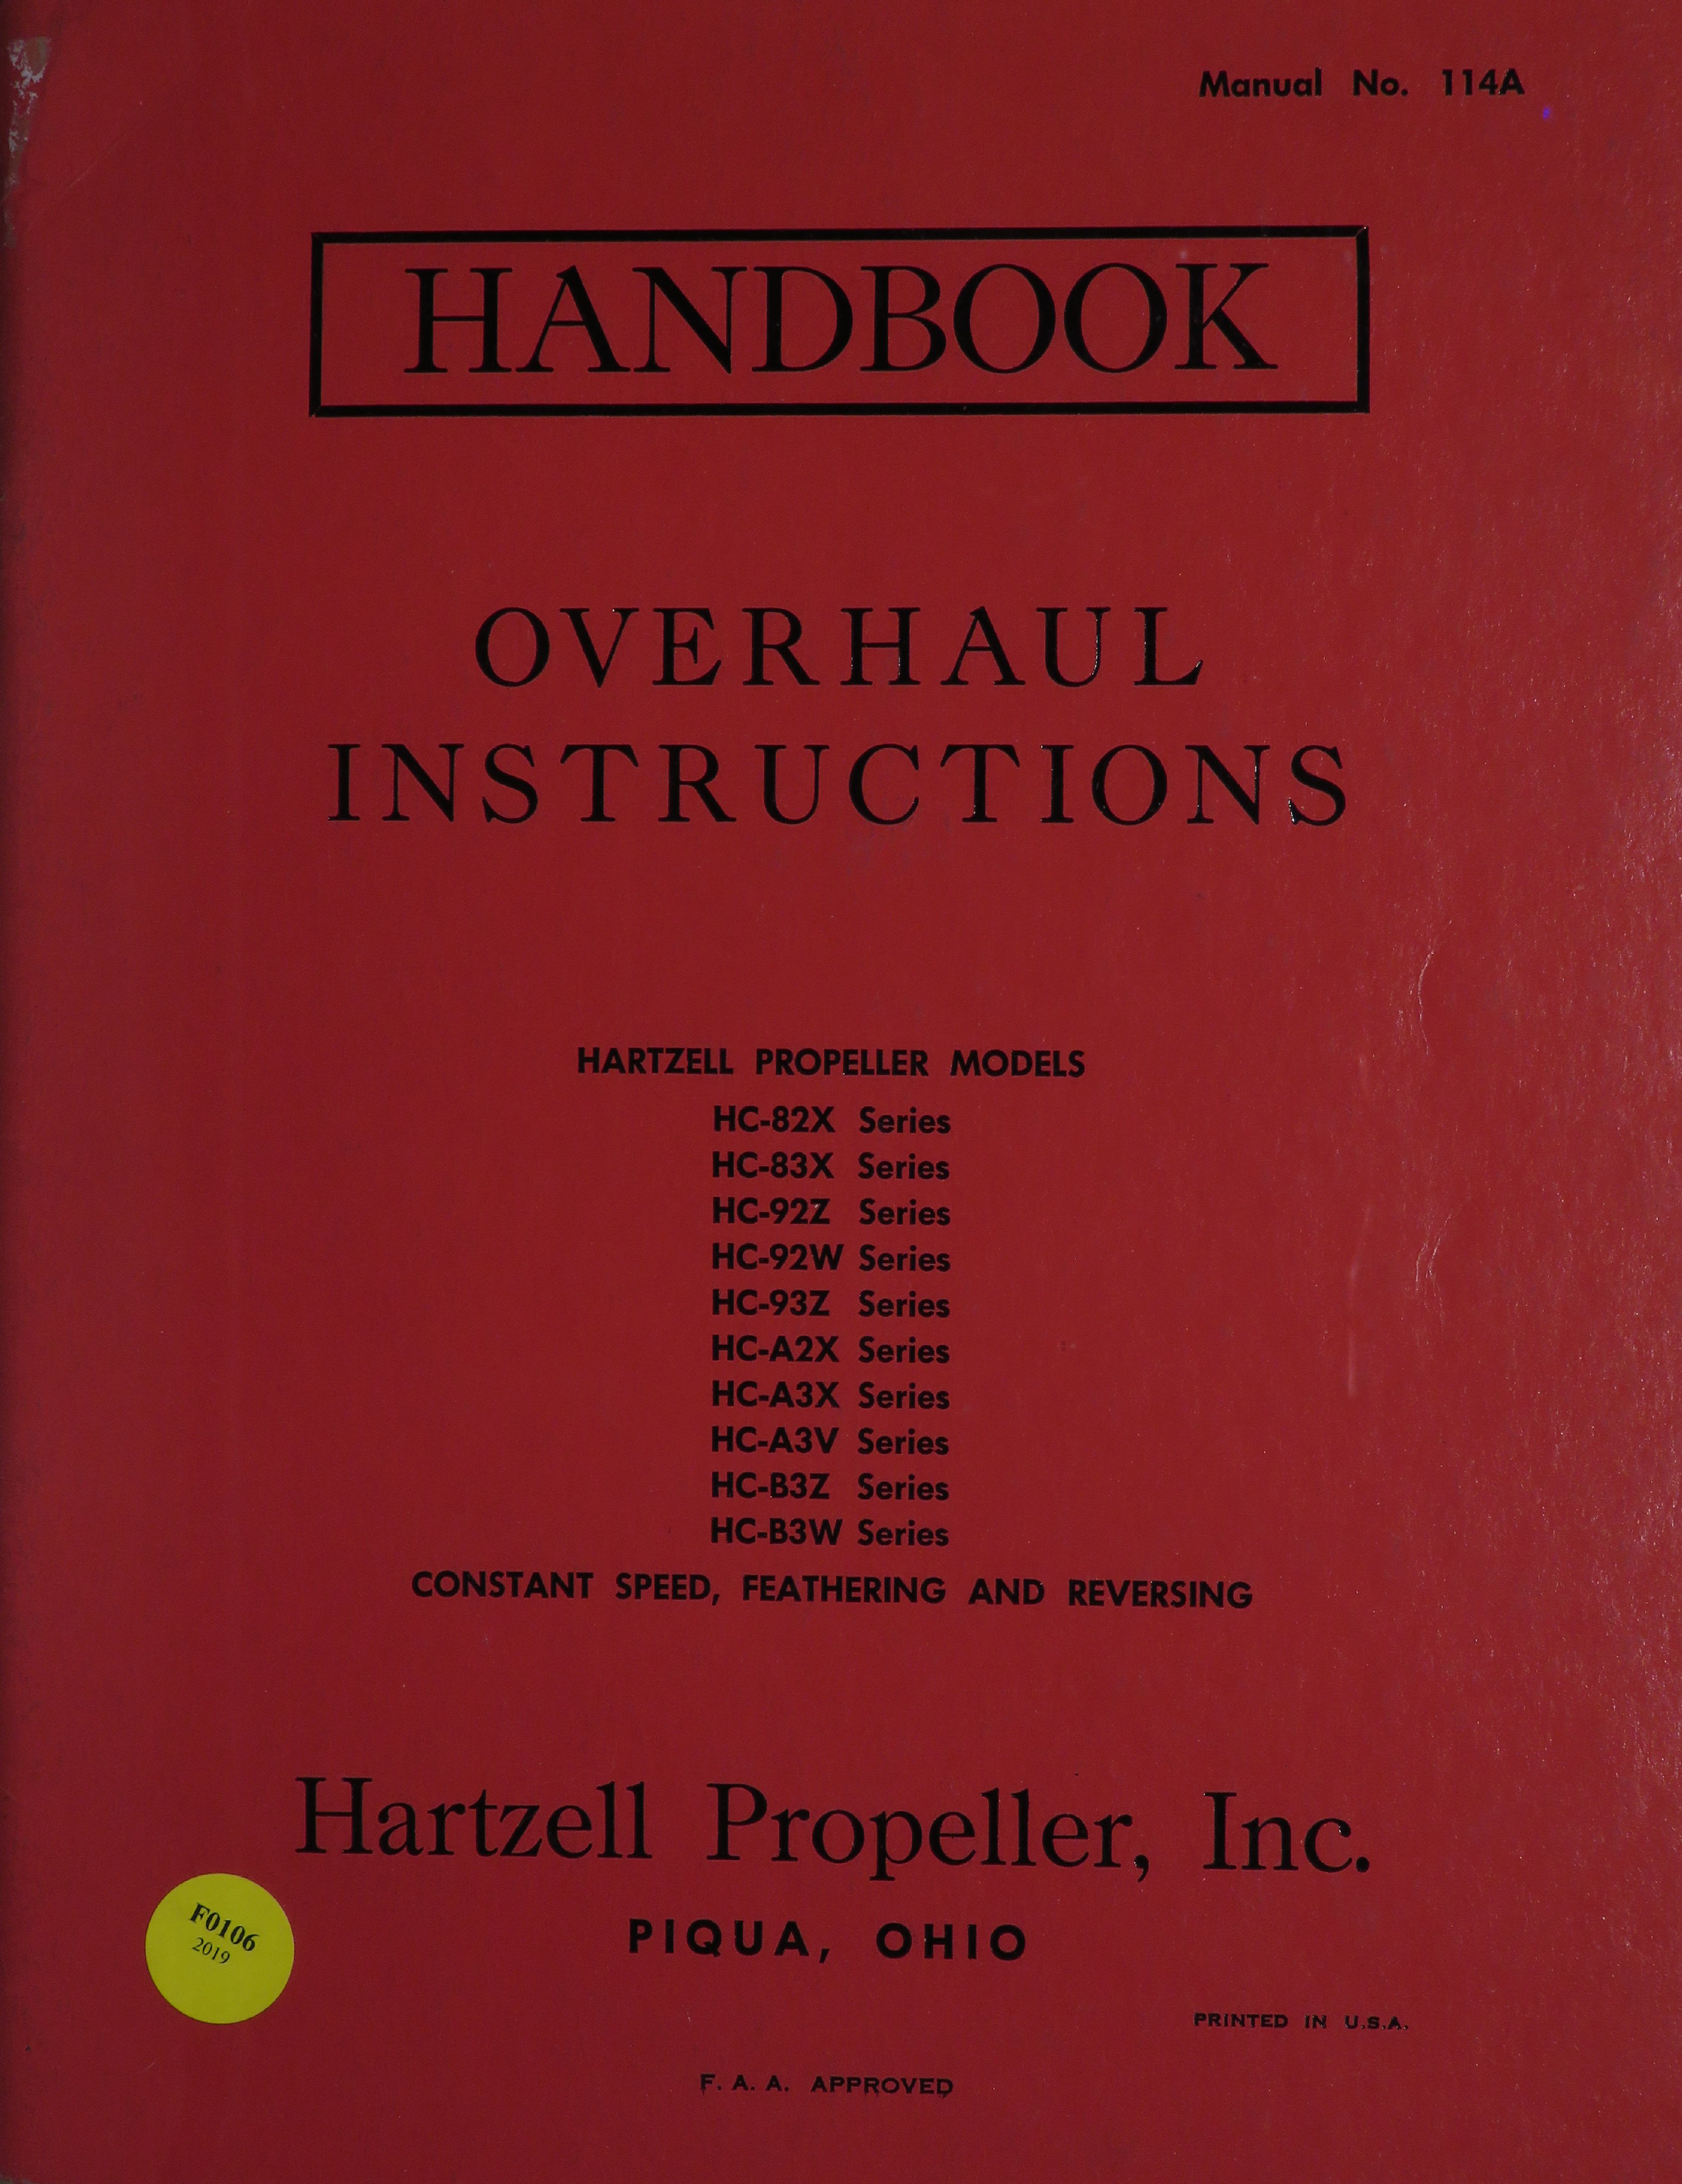 Sample page 1 from AirCorps Library document: Overhaul Instructions for Constant Speed, Feathering and Reversing Hartzell Propellers